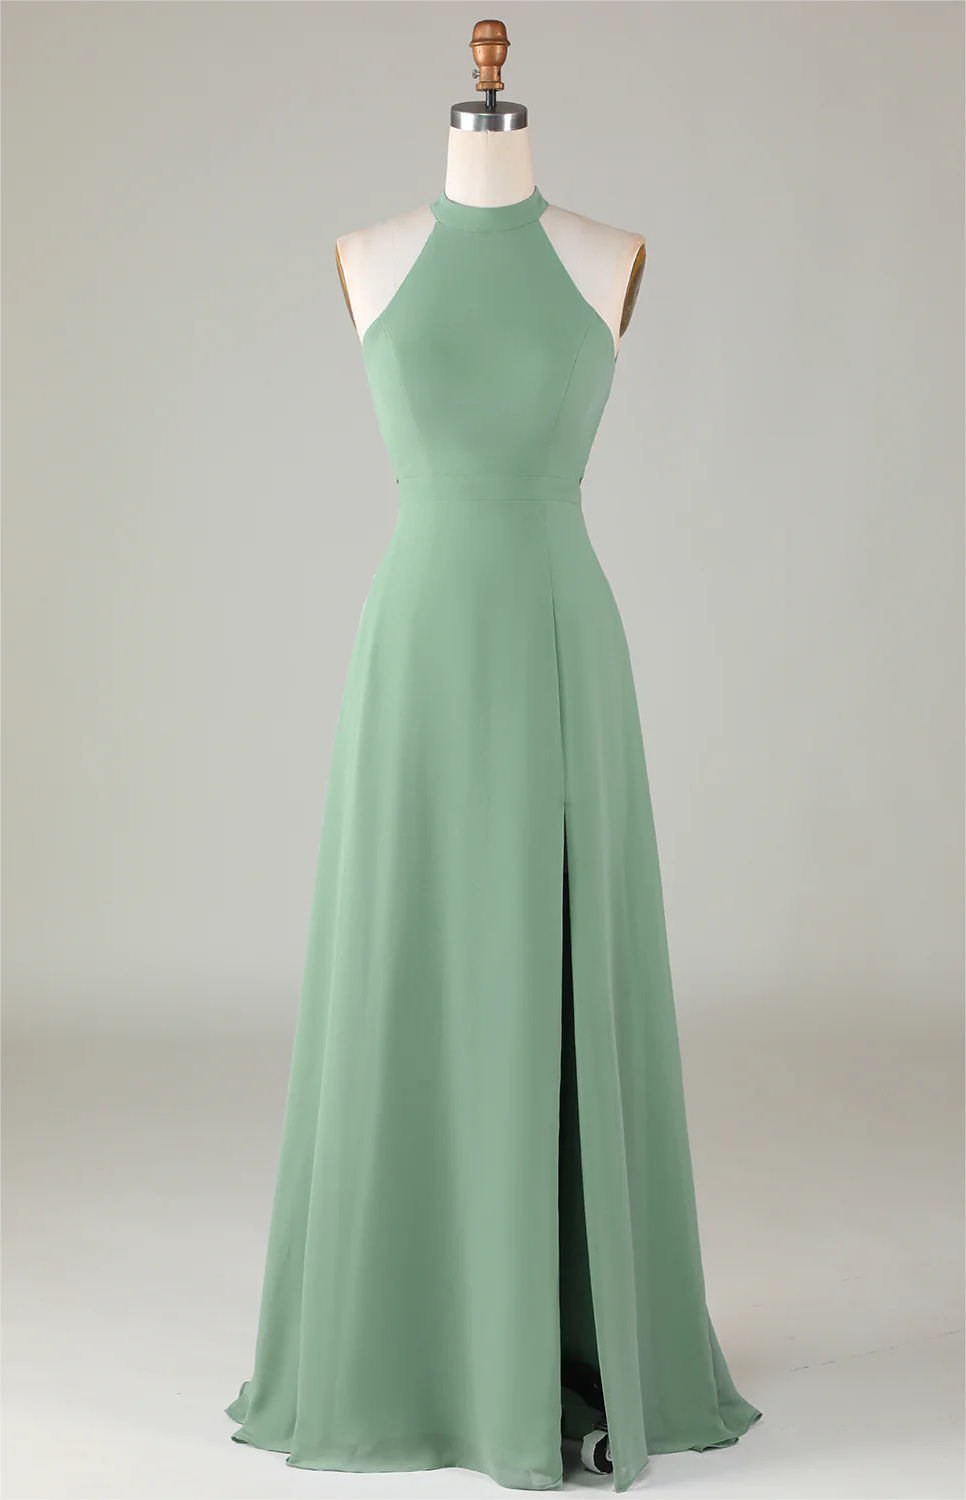 Prom Dresses, A-line Halter Open Back Matcha Bridesmaid Dress With Split Front